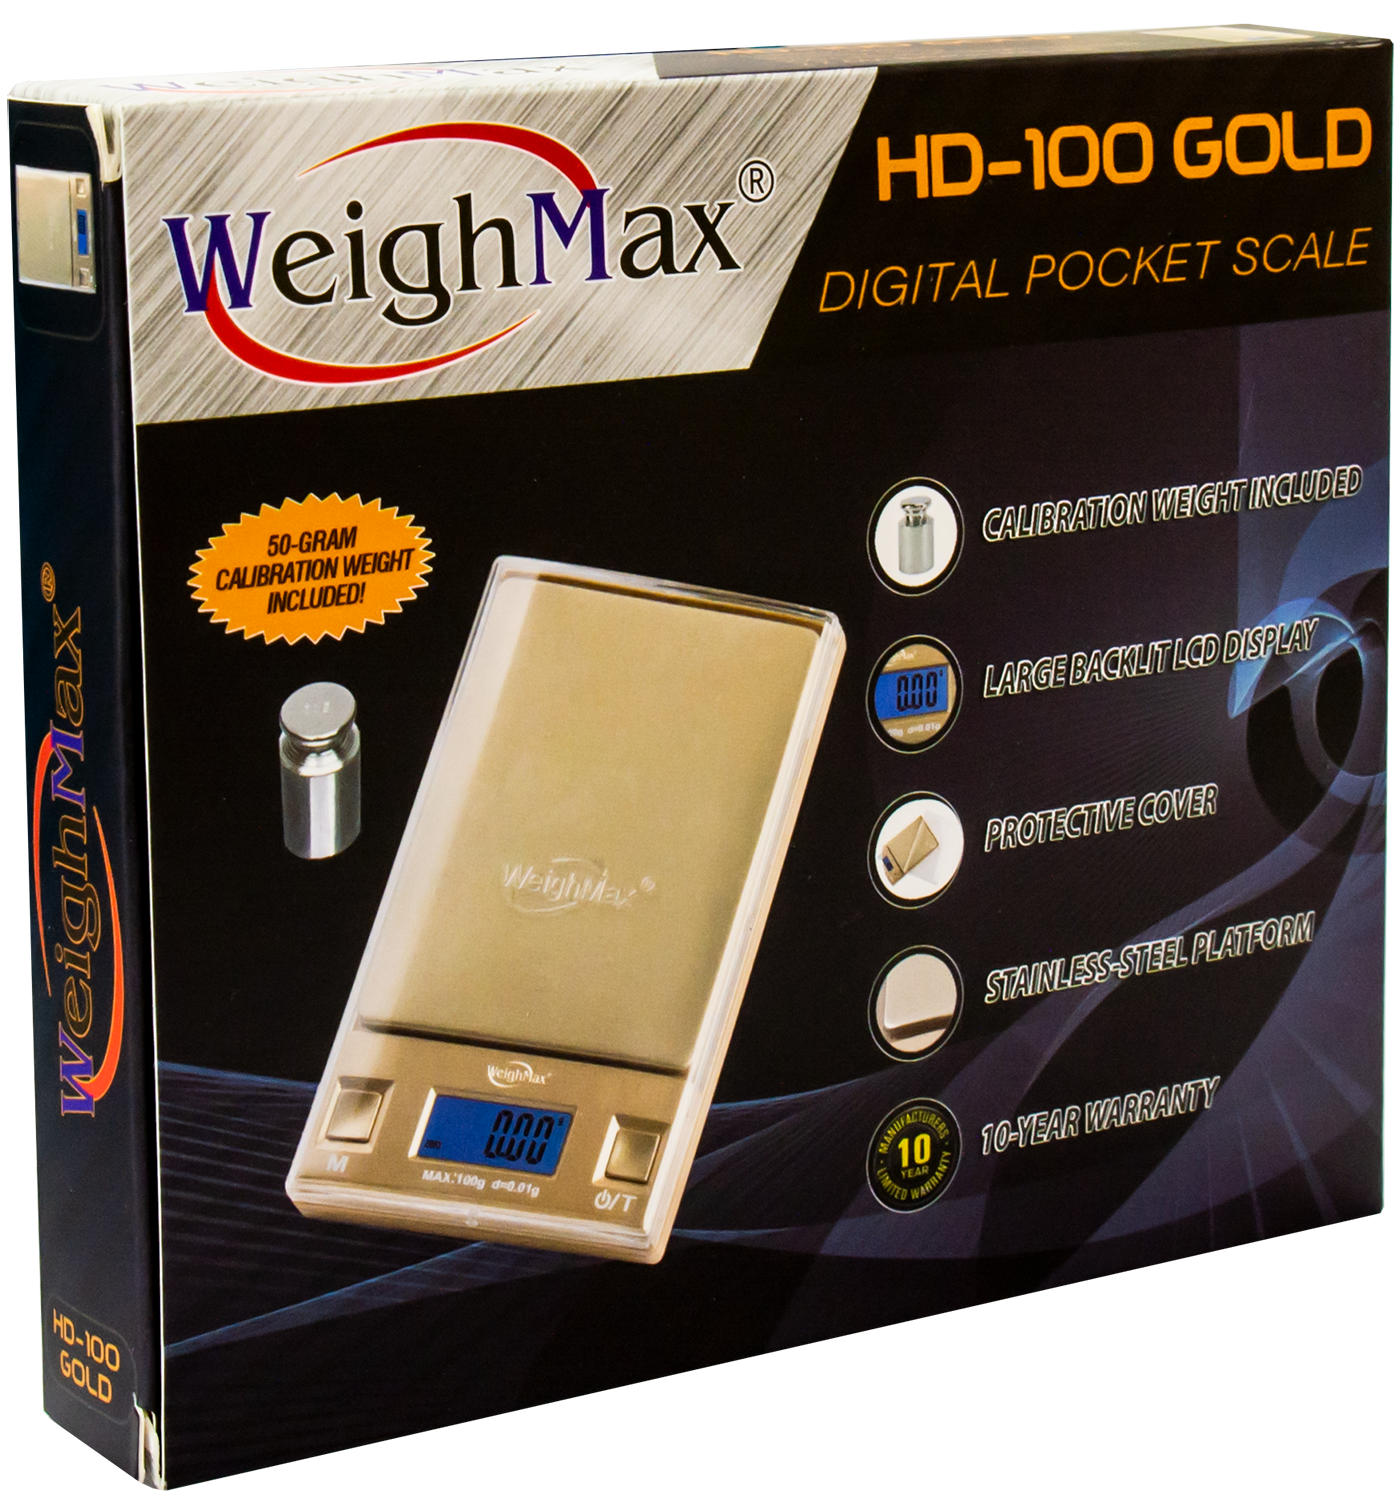 WeighMax | HD-100 Digital Scale | 100g Capacity - 0.01g Readability - Various Colors Scale Biohazard Inc Gold  